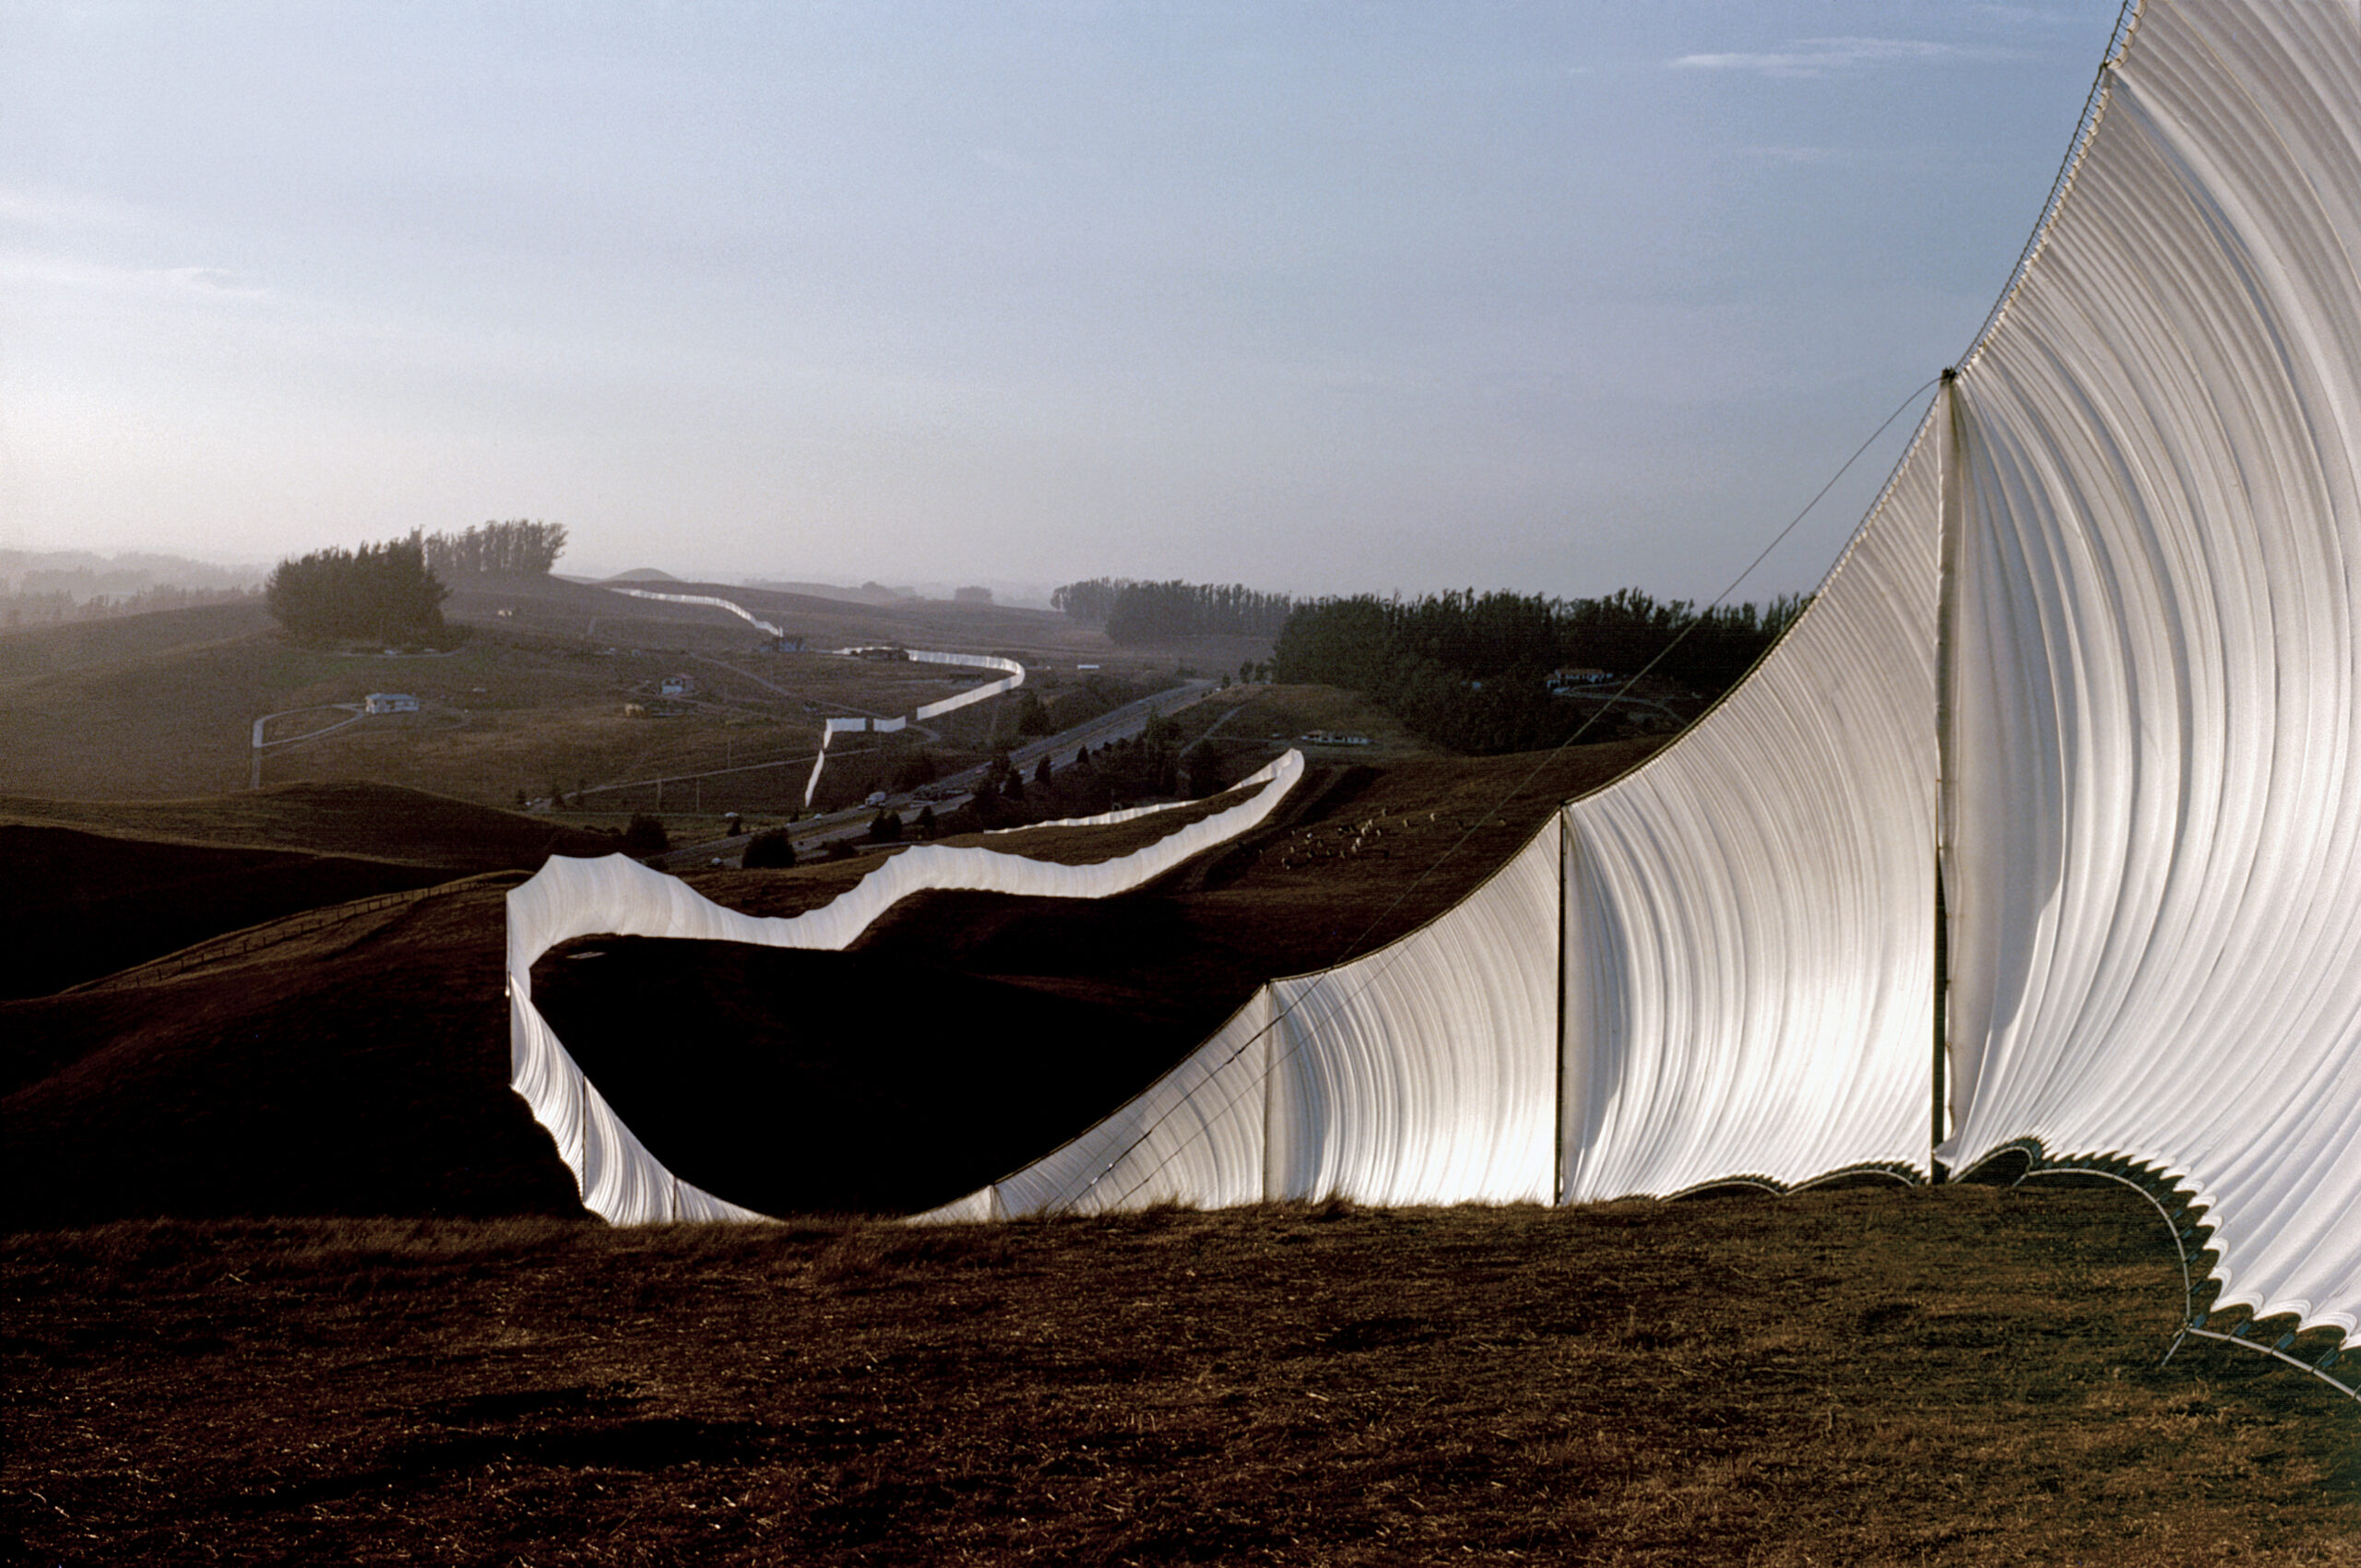 Running Fence, Christo and Jean-Claude, 1976